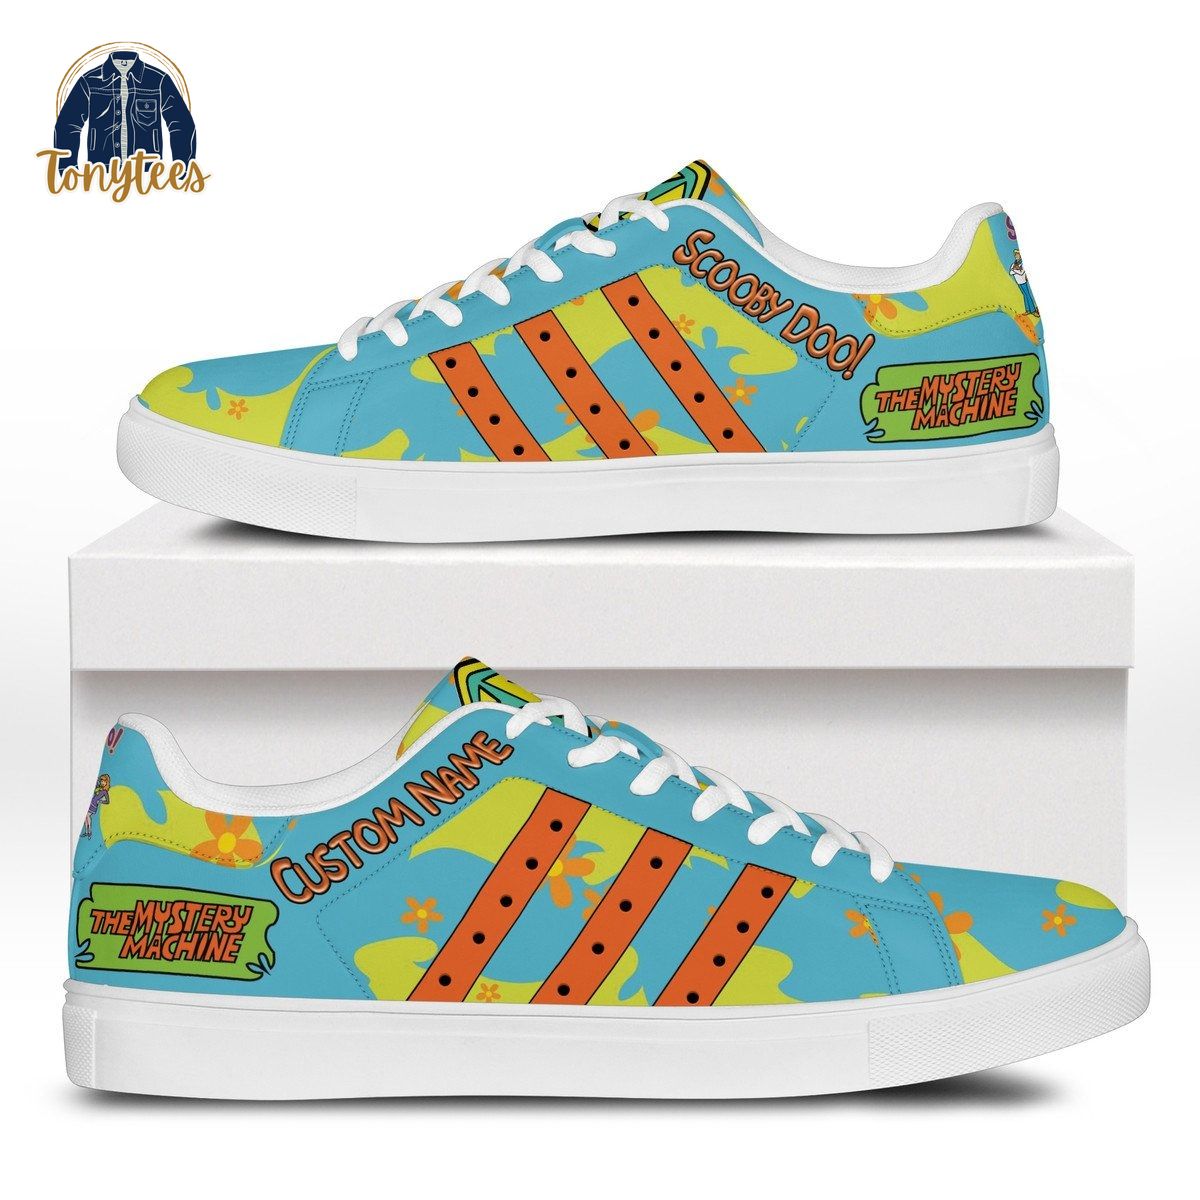 Scooby Doo the mystery machine custom name adidas stan smith shoes